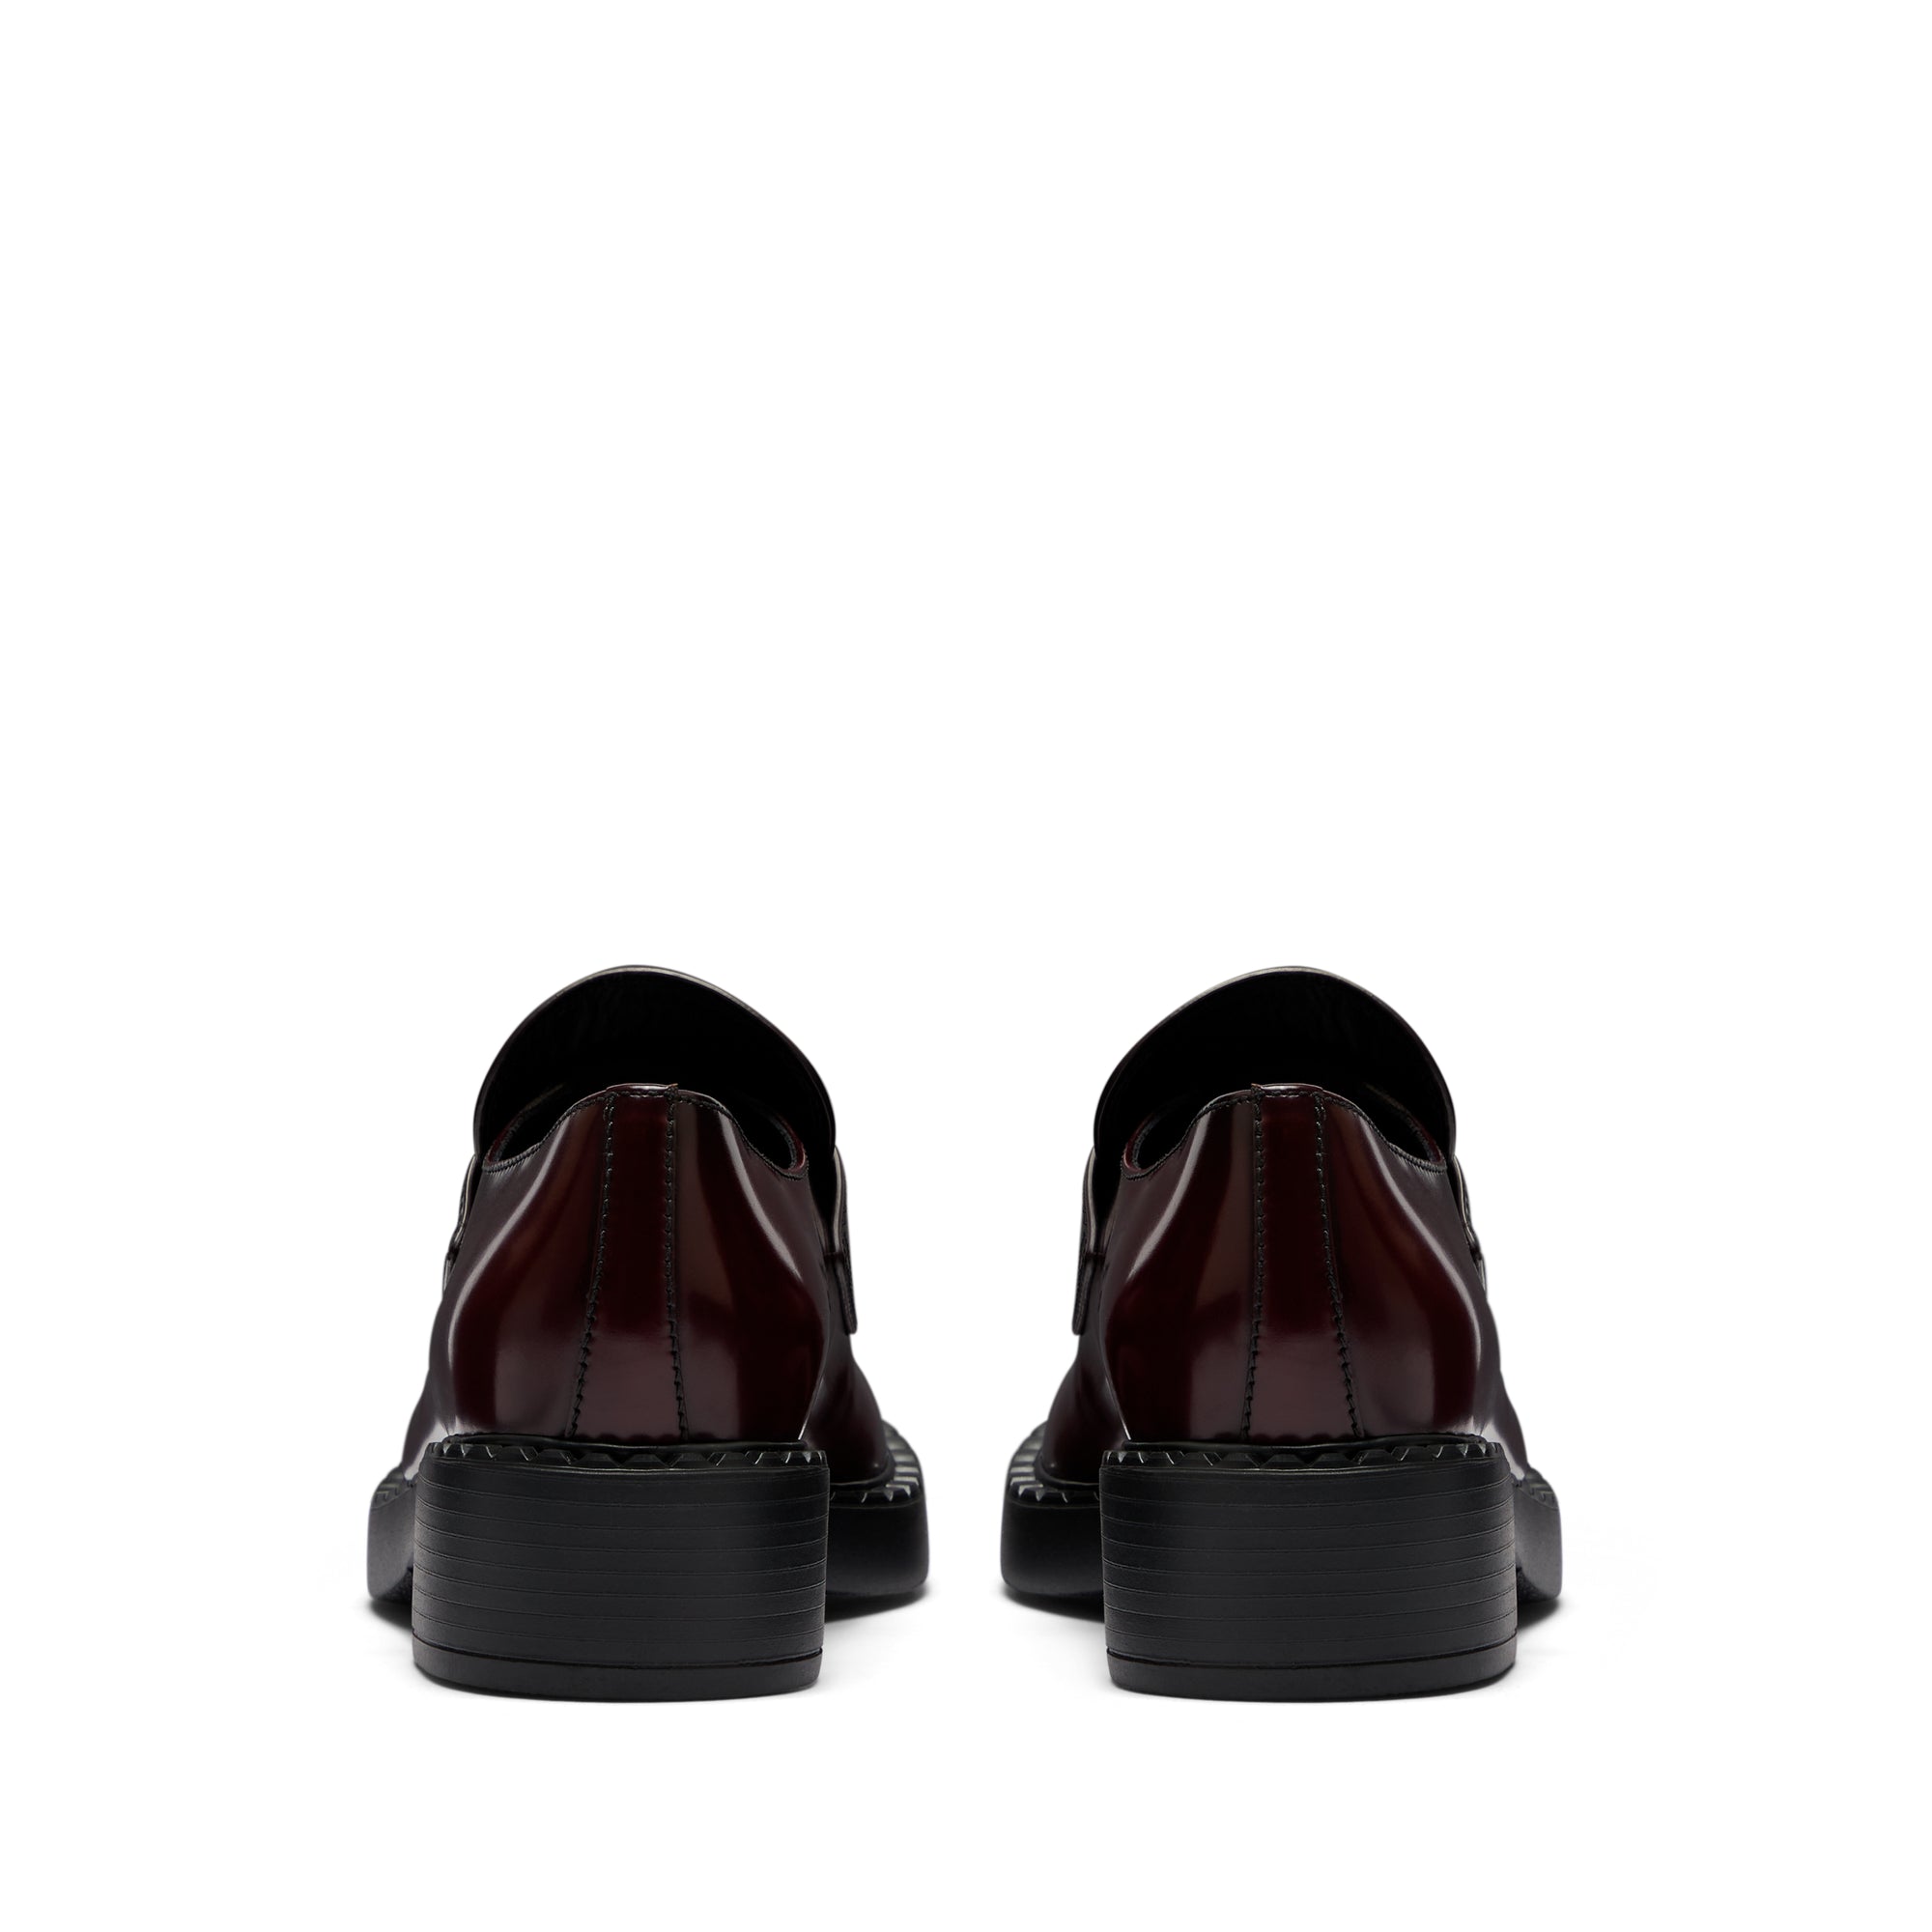 Prada - Women’s Brushed Leather Loafer - (Cordovan) view 5